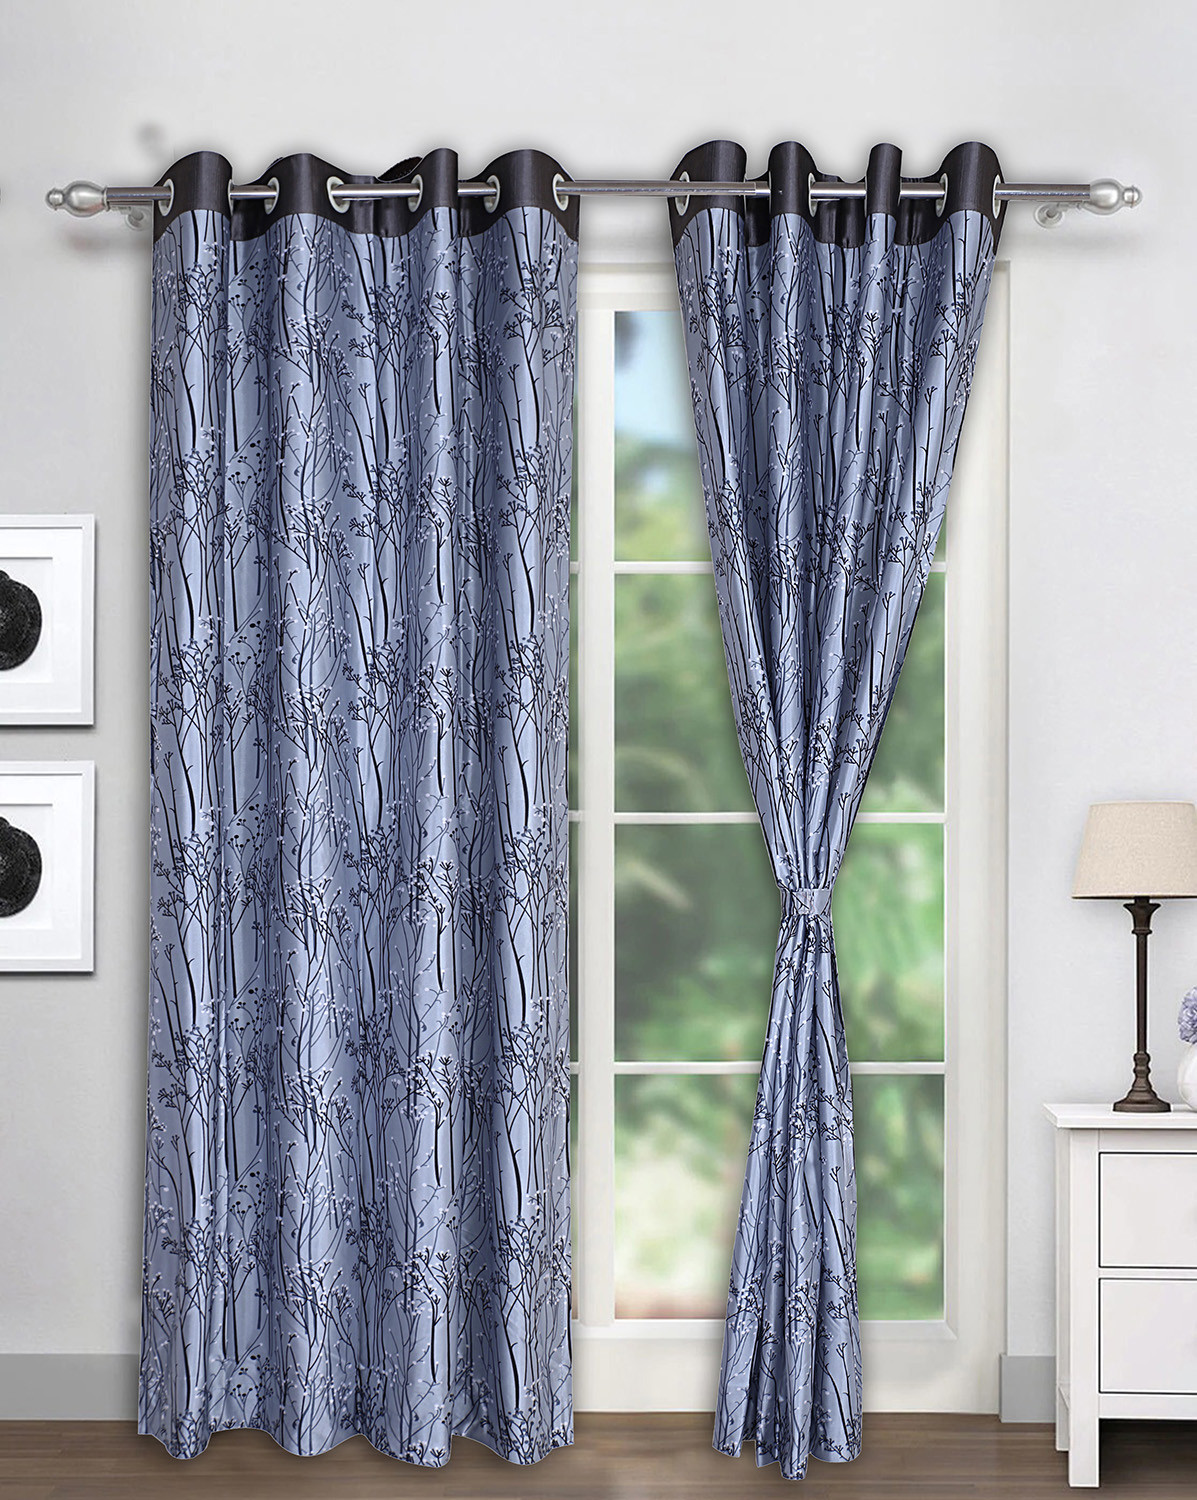 Kuber Industries Polyester Decorative 7 Feet Door Curtain|Tree Branches Print Blackout Drapes Curatin With 8 Eyelet For Home & Office (Gray)